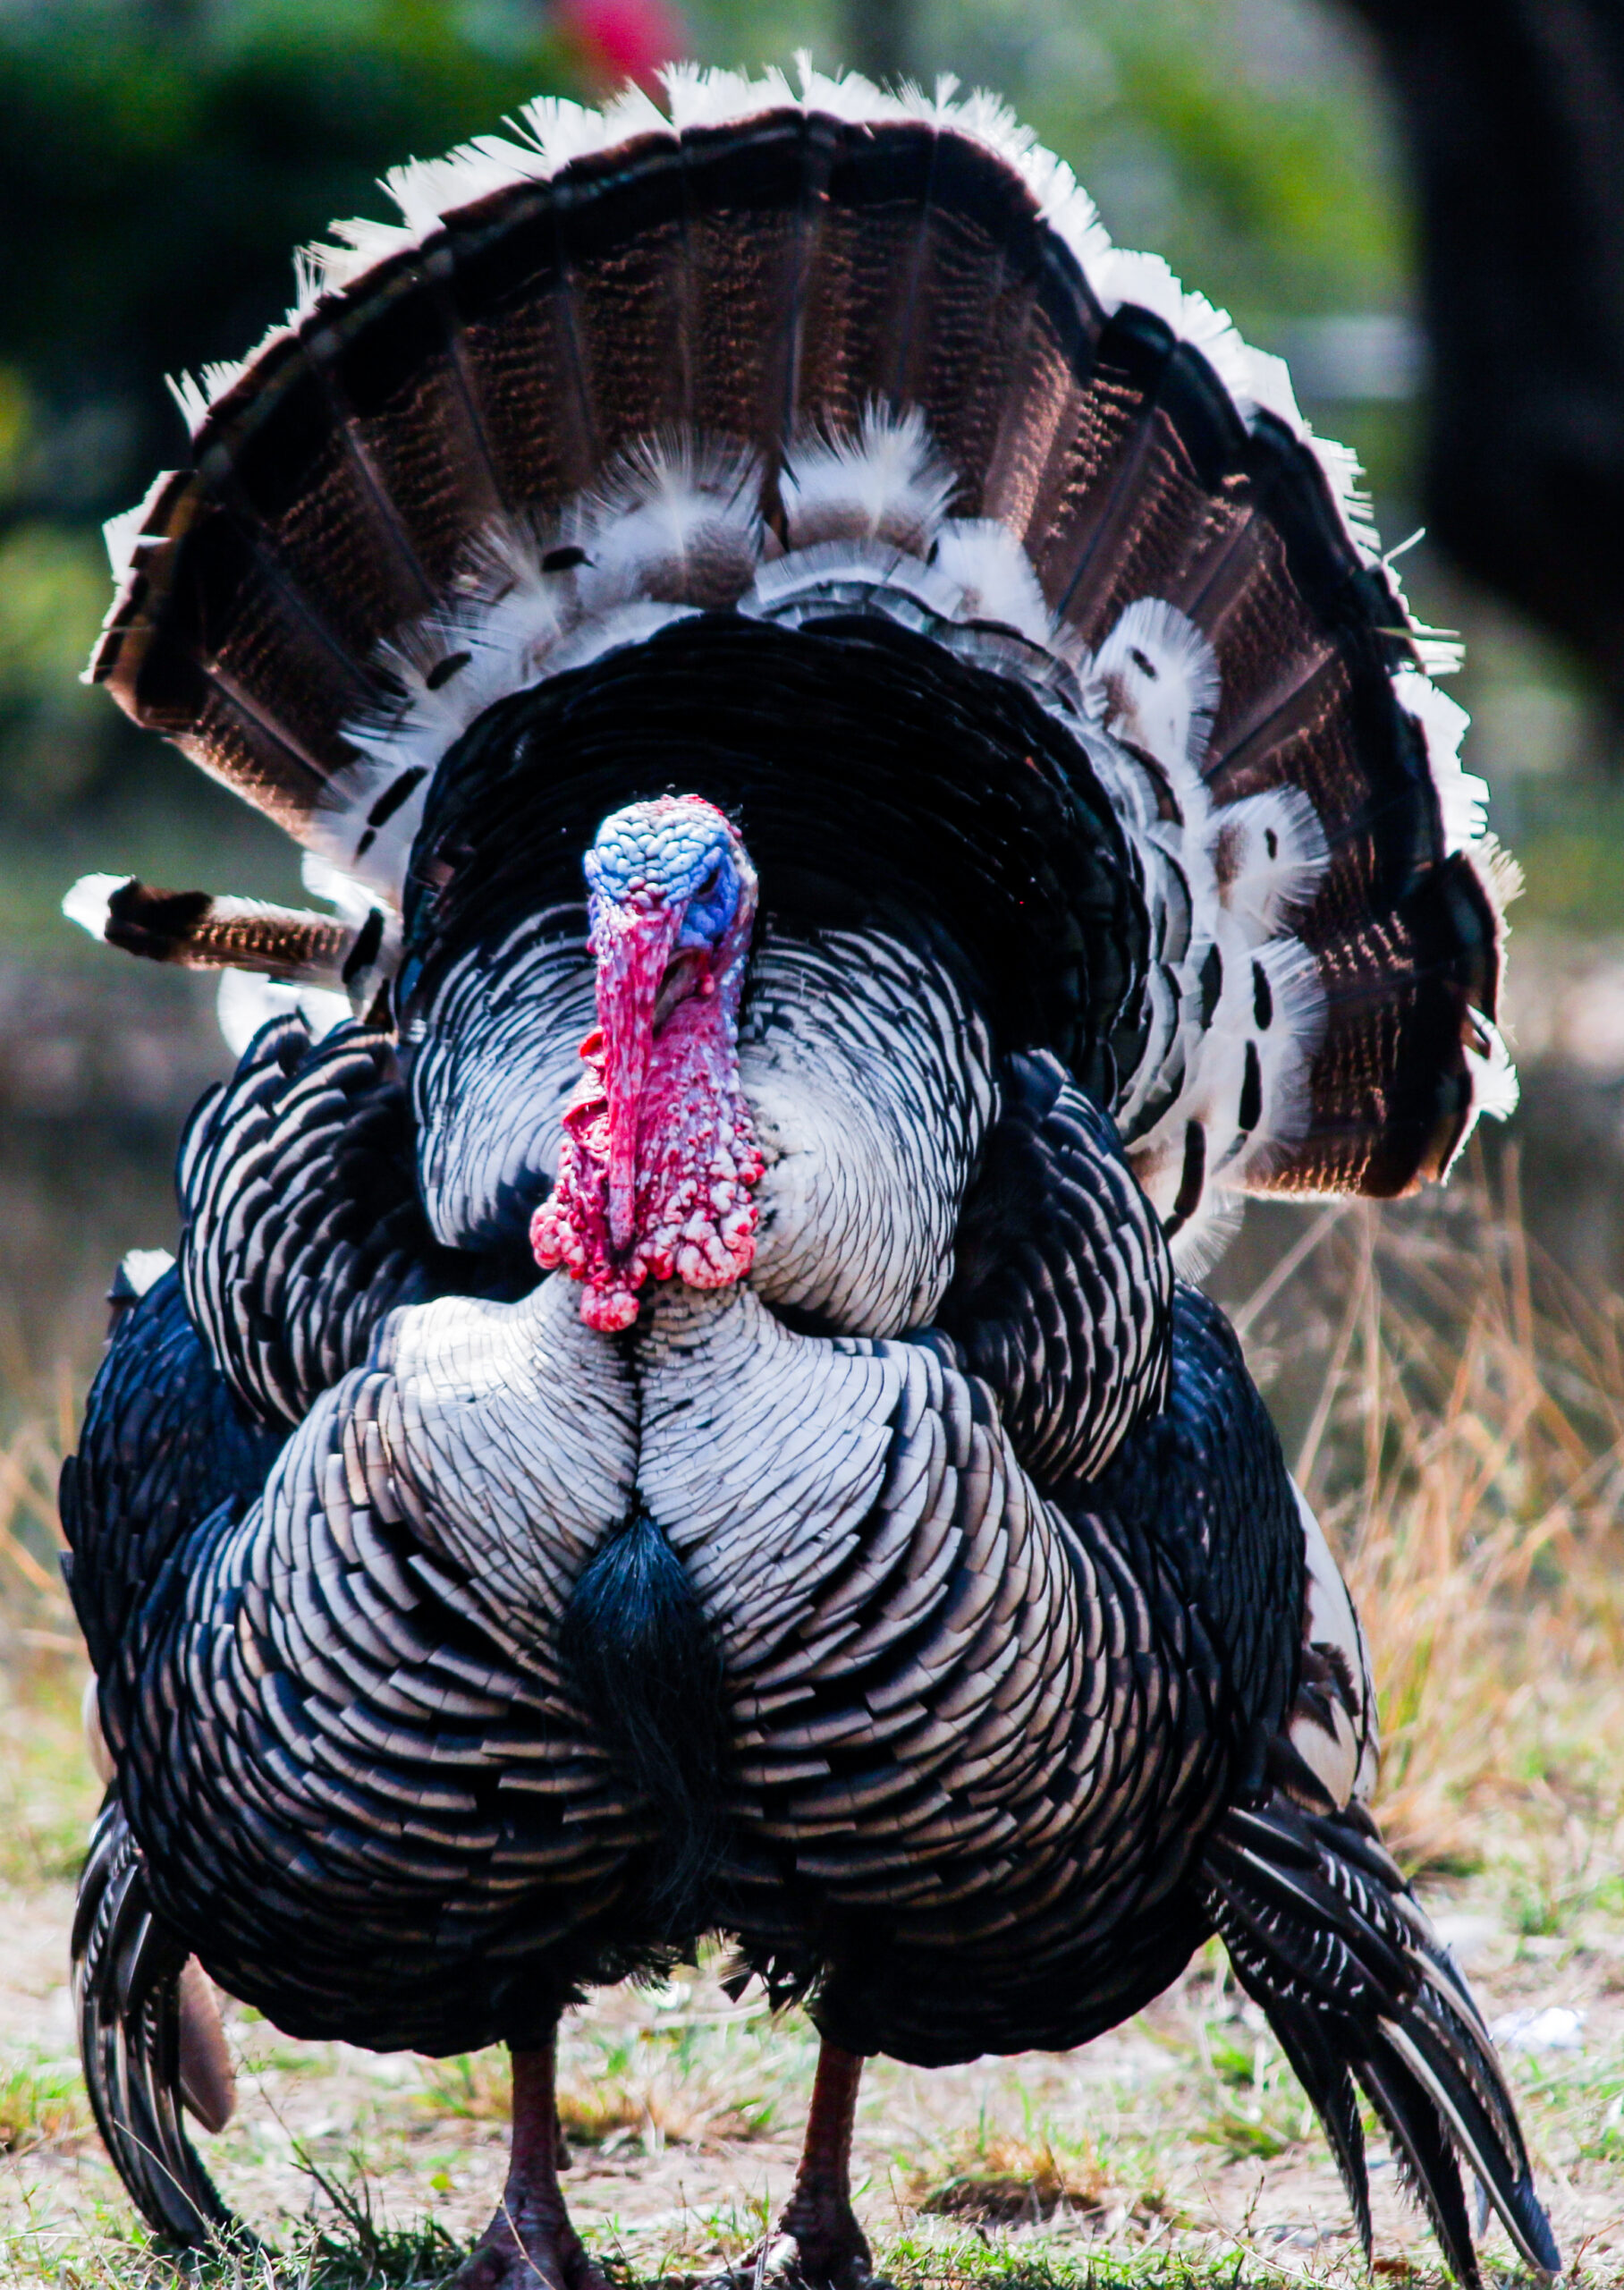 Read more about the article Spring Turkey Season: Laws and Regulations You Need to Know.